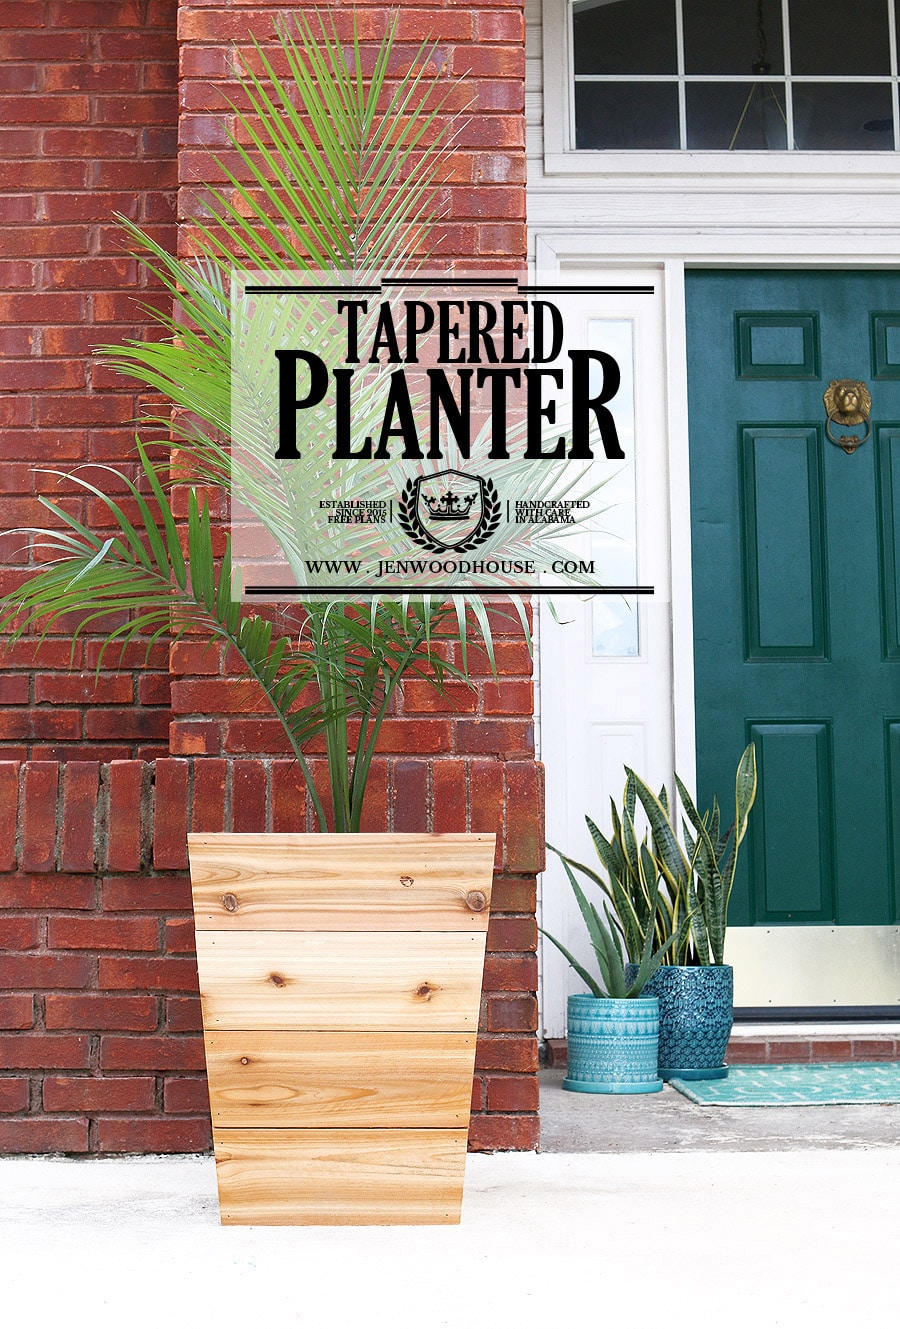 How to build a DIY modern, tapered cedar planter - free design plans and tutorial from Jen Woodhouse